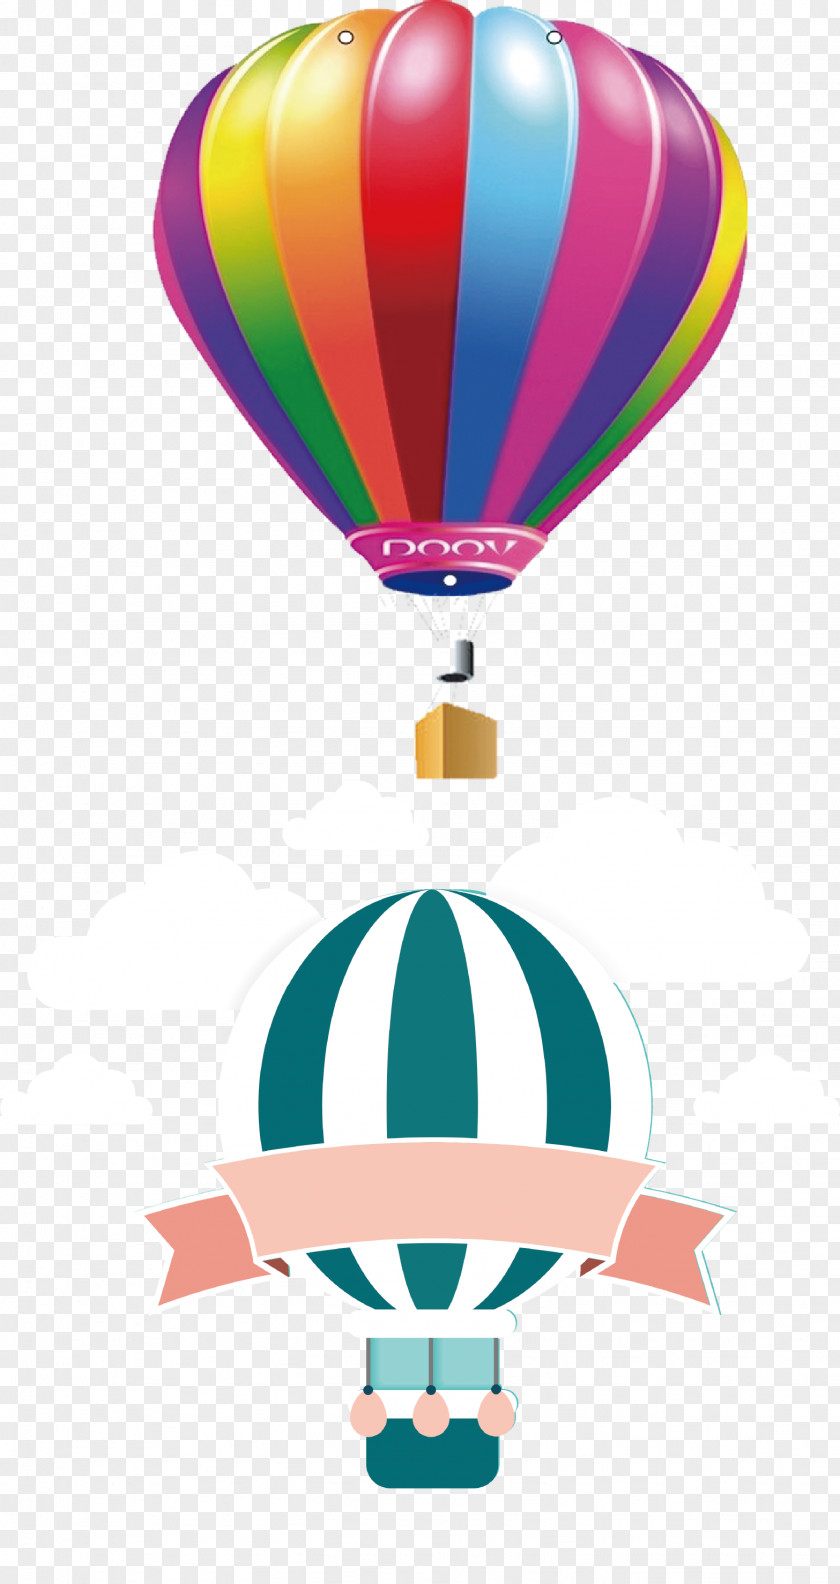 The Parachute Is Beautifully Decorated And Patterned Balloon Basket Illustration PNG